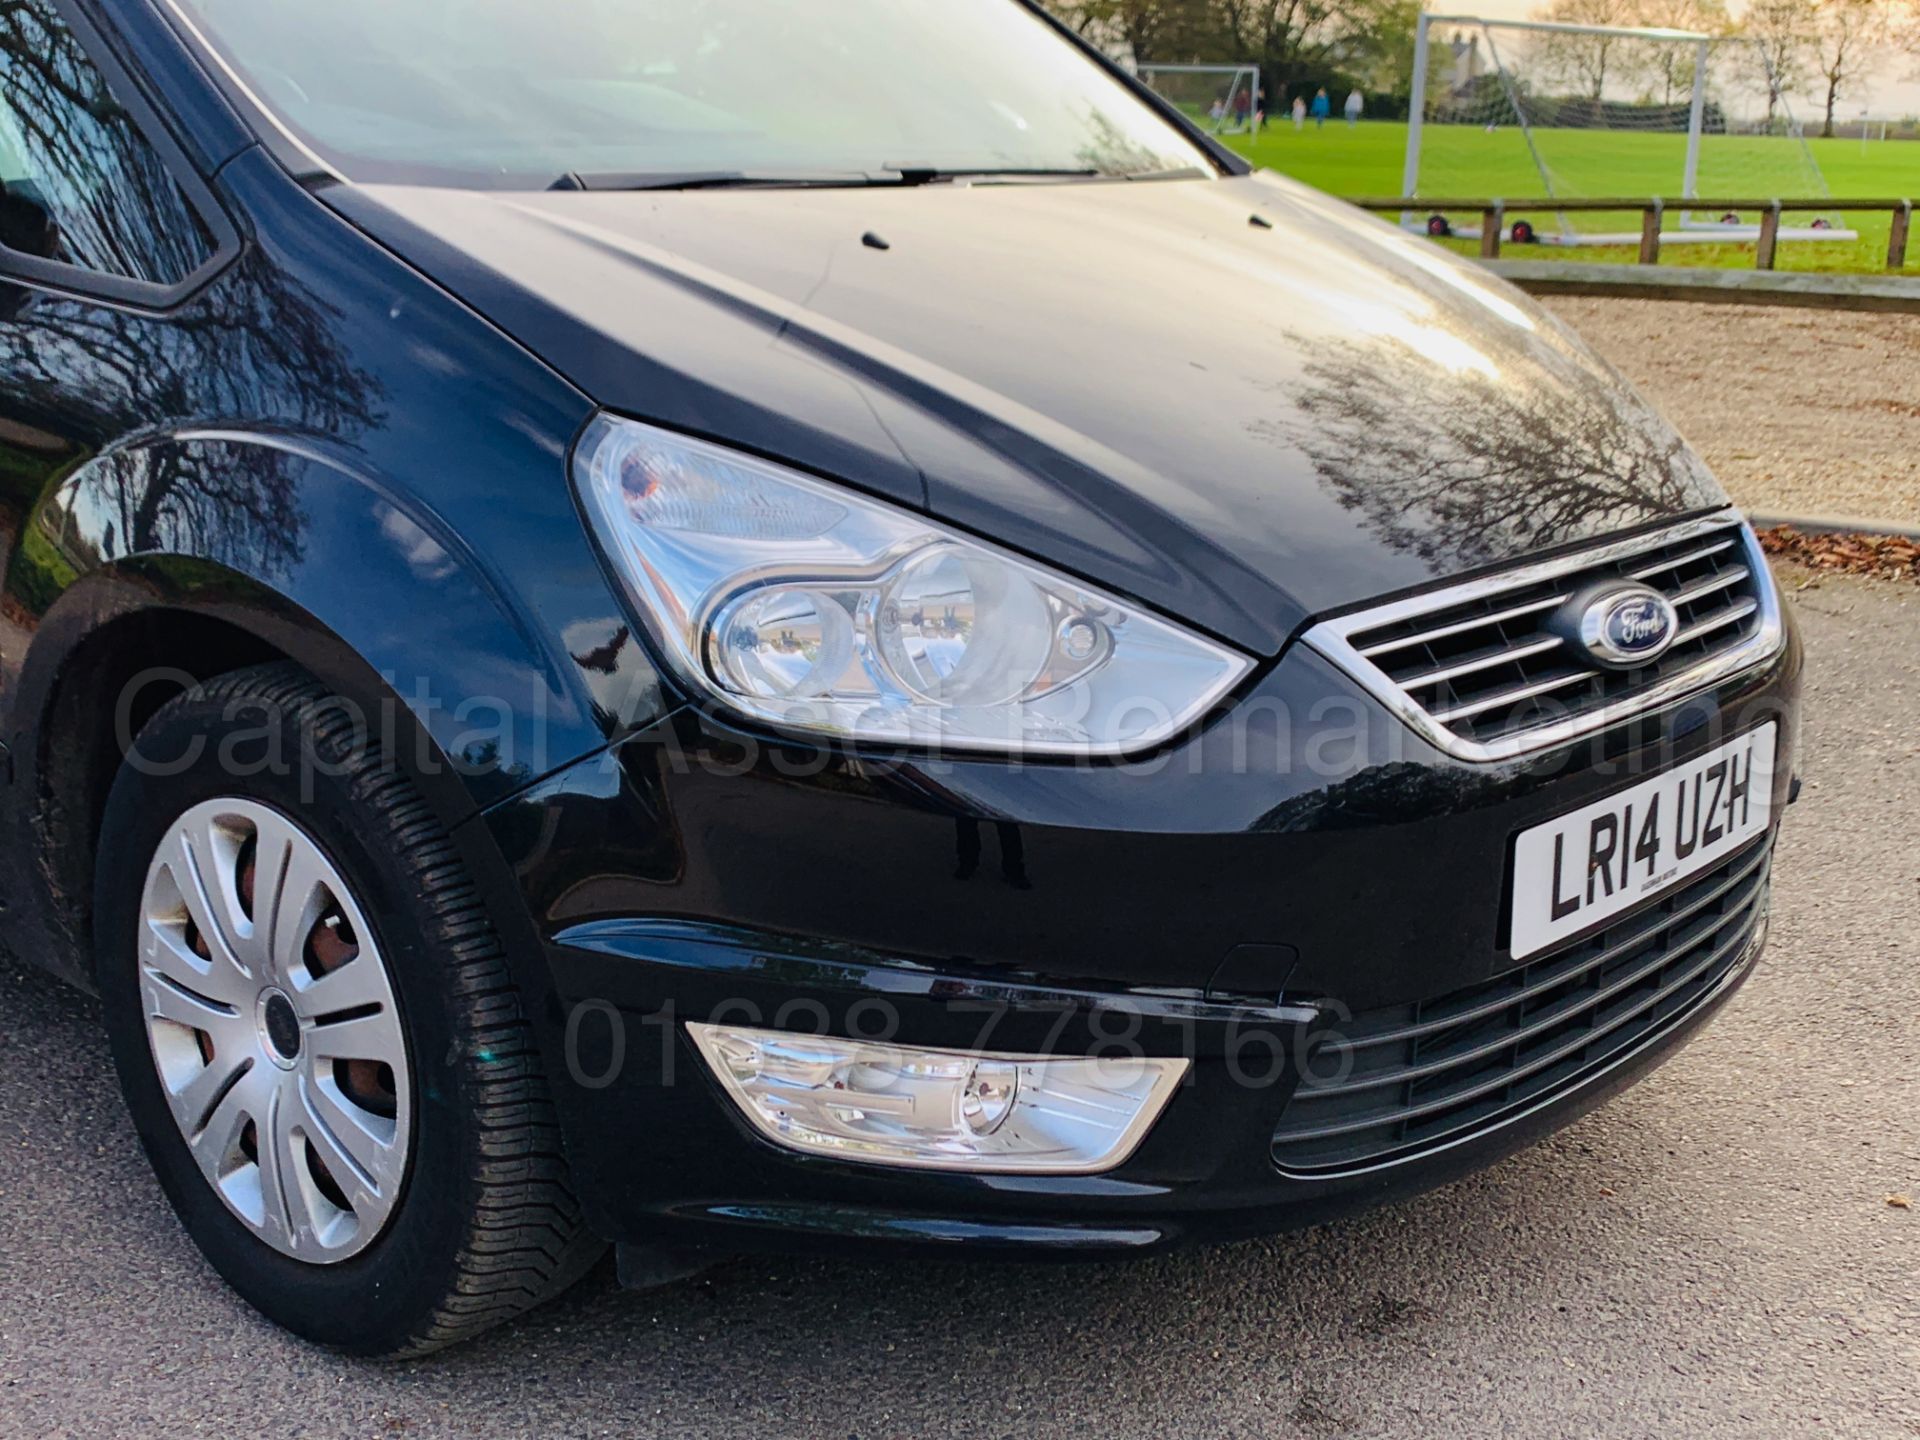 (ON SALE) FORD GALAXY **ZETEC** 7 SEATER MPV (2014) 2.0 TDCI - 140 BHP - AUTO POWER SHIFT (1 OWNER) - Image 13 of 37